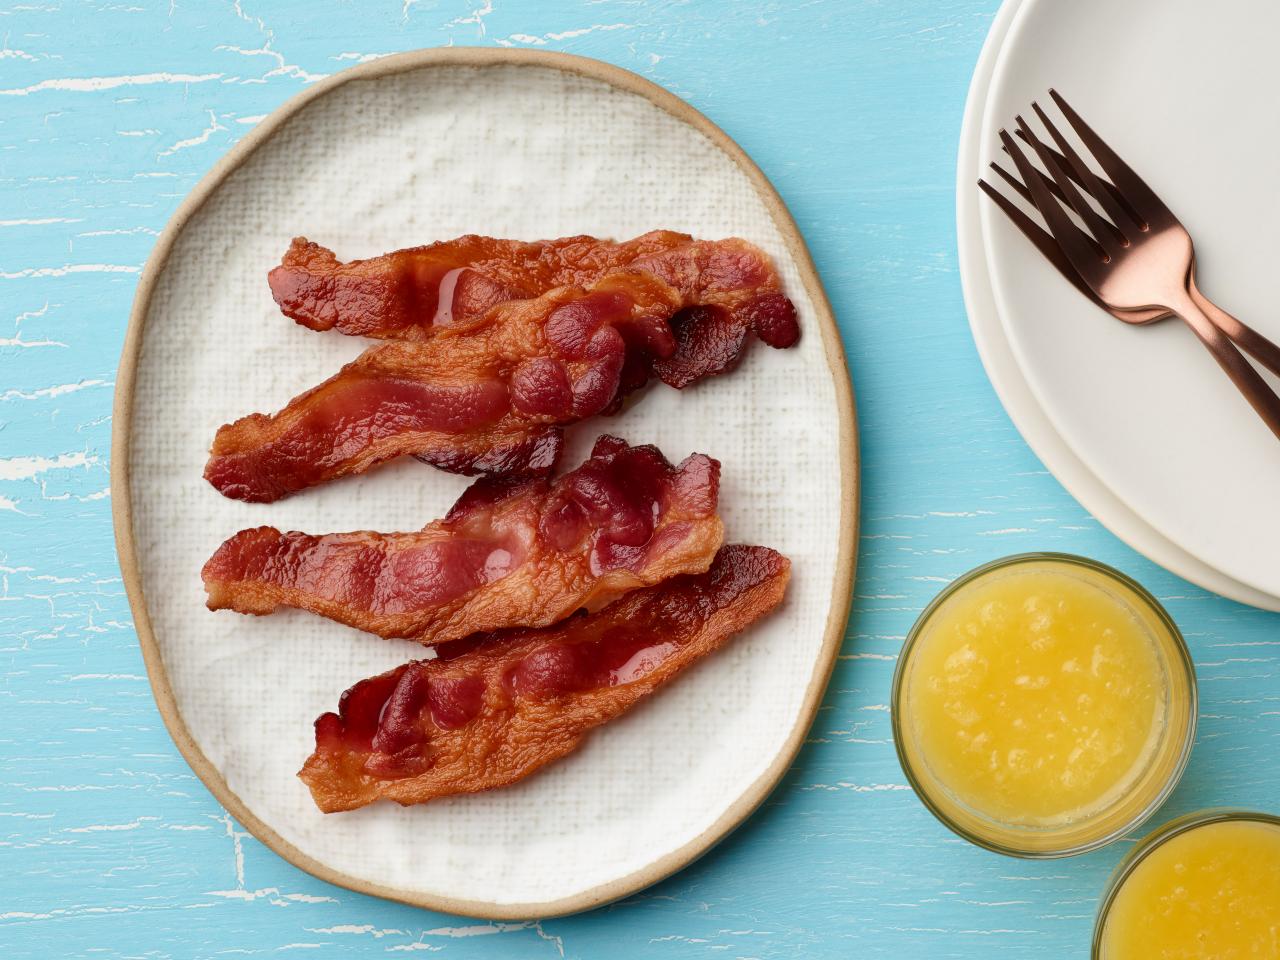 https://food.fnr.sndimg.com/content/dam/images/food/fullset/2021/12/10/0/FNK_How-to-Make-Bacon-In-the-Microwave-Beauty-Shot_s4x3.jpg.rend.hgtvcom.1280.960.suffix/1639163479832.jpeg